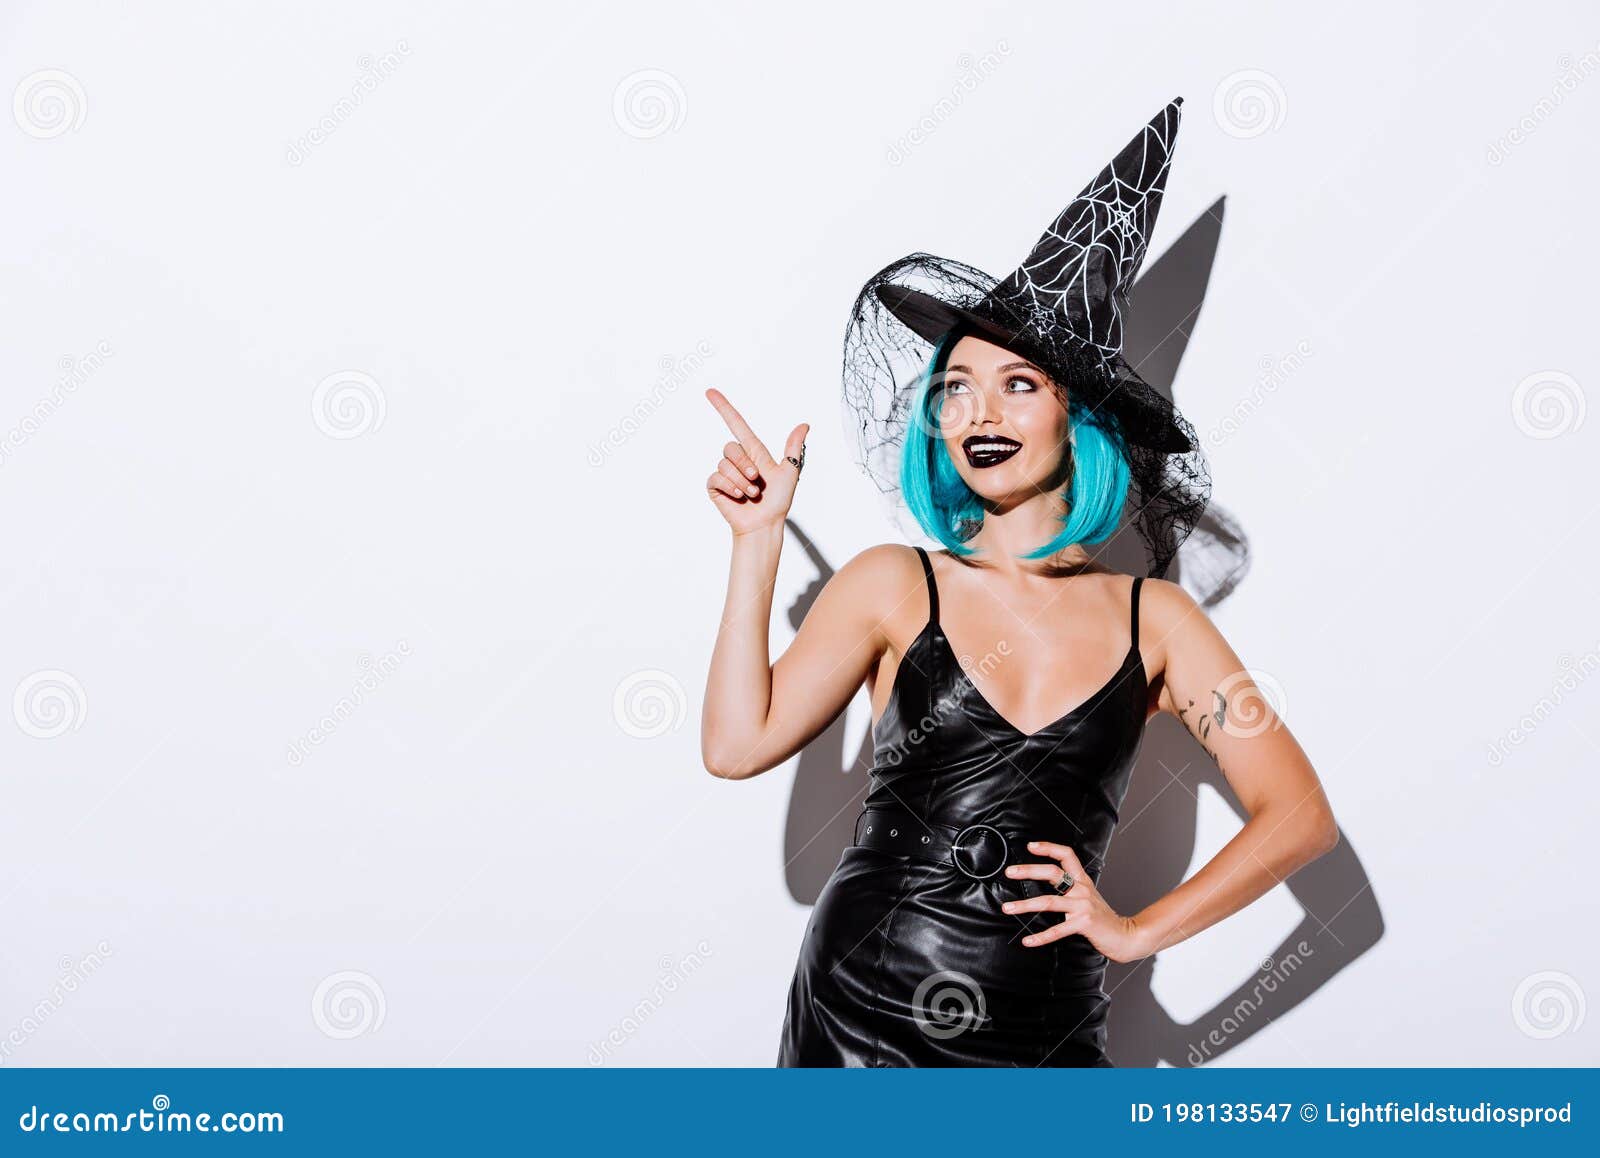 1. "Blue Haired Witch Halloween Costume" - wide 8